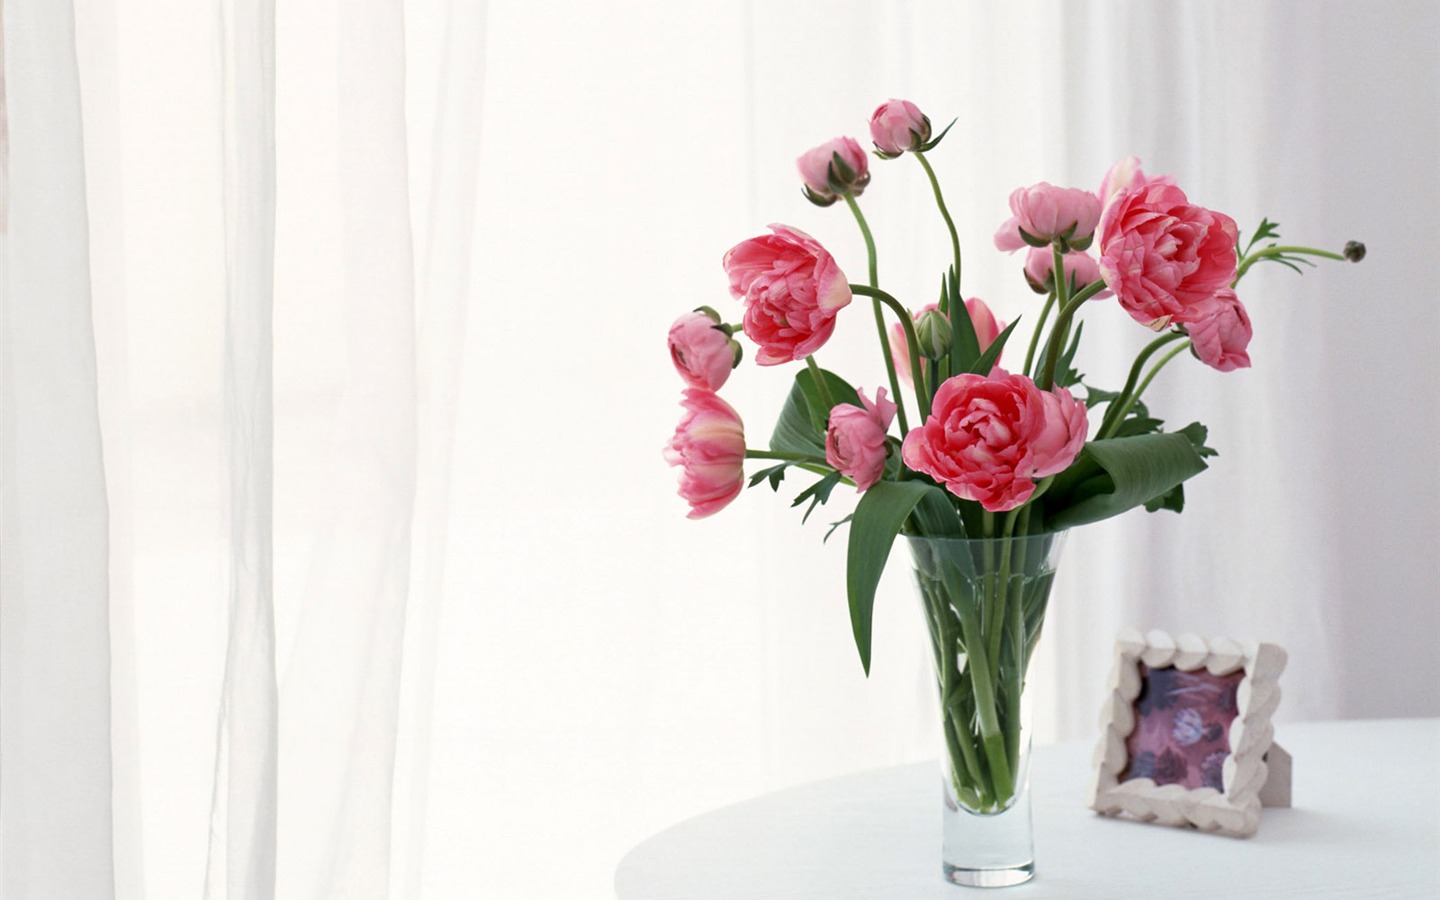 Room Flower photo wallpapers #16 - 1440x900